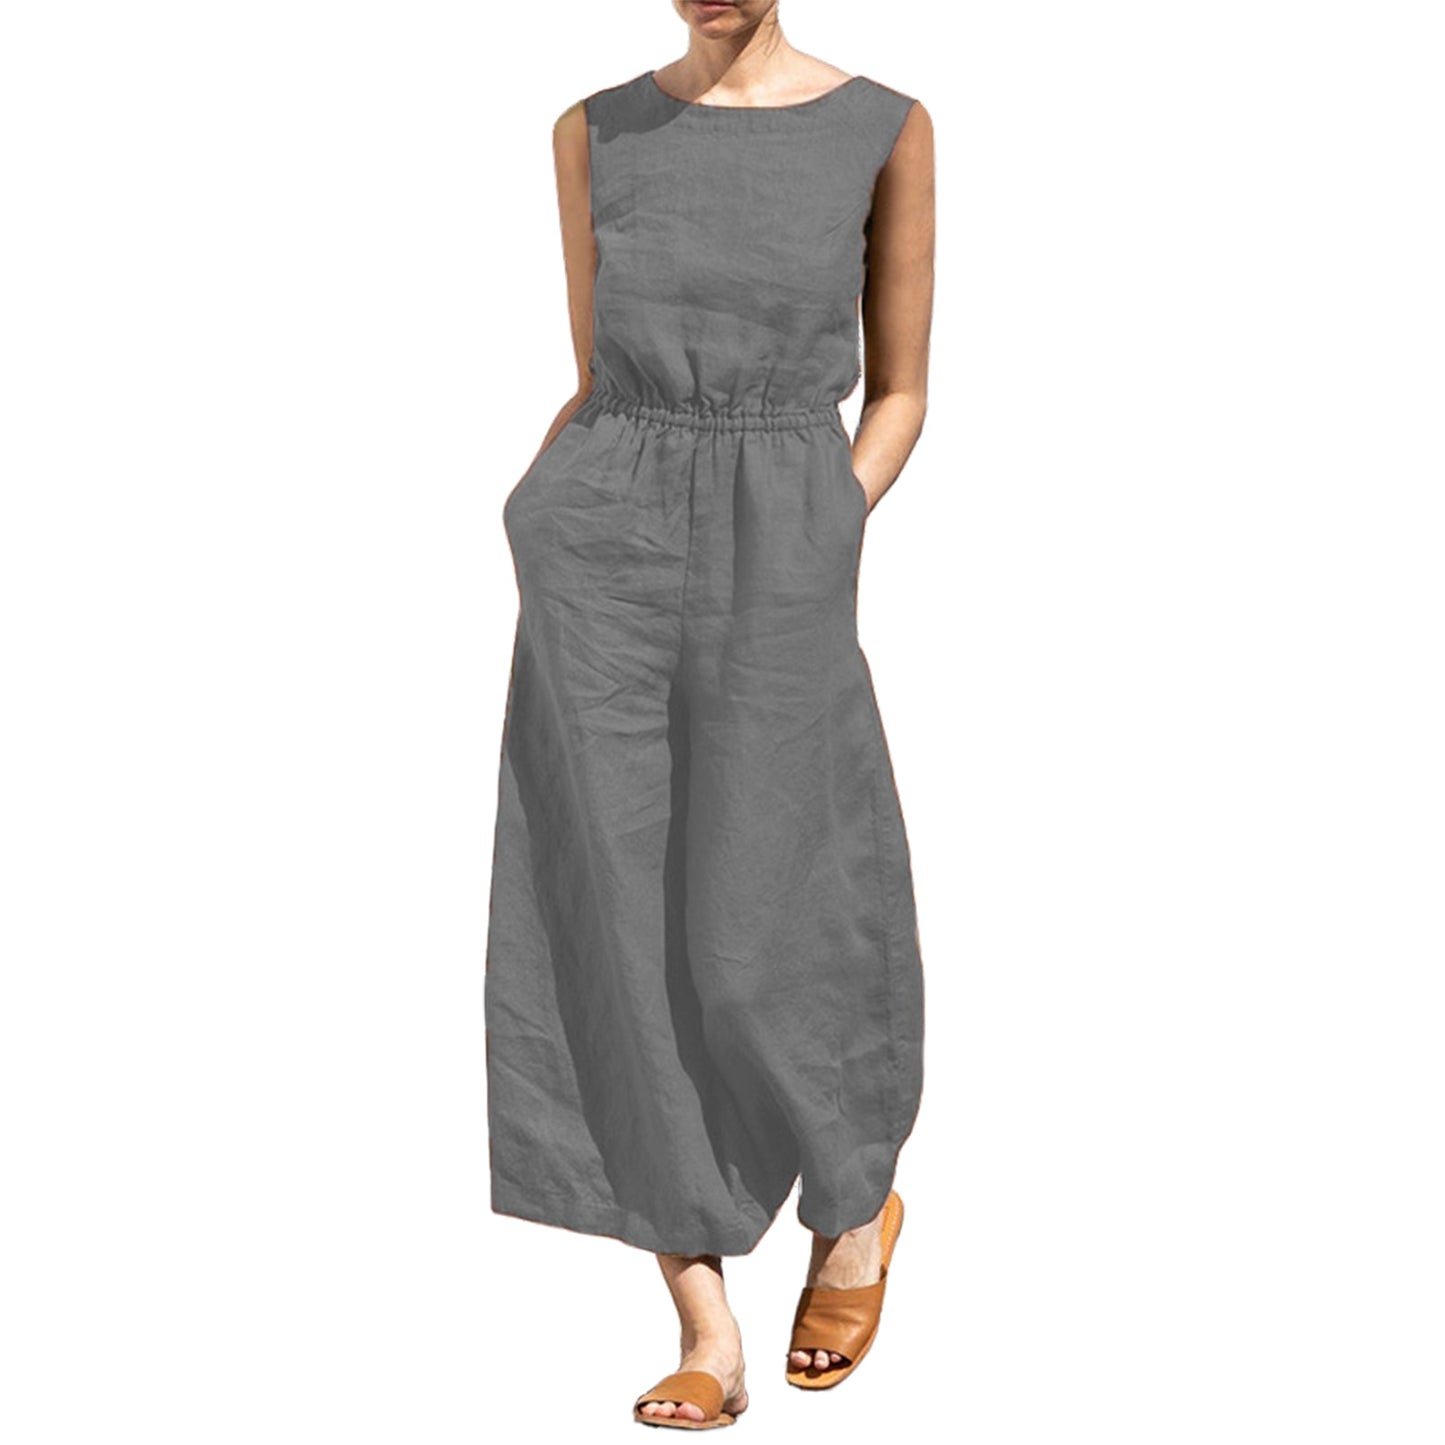 Rompers 2023 New Brand Women Casual Loose/Cotton Linen Solid Pockets Jumpsuit Sleeveless